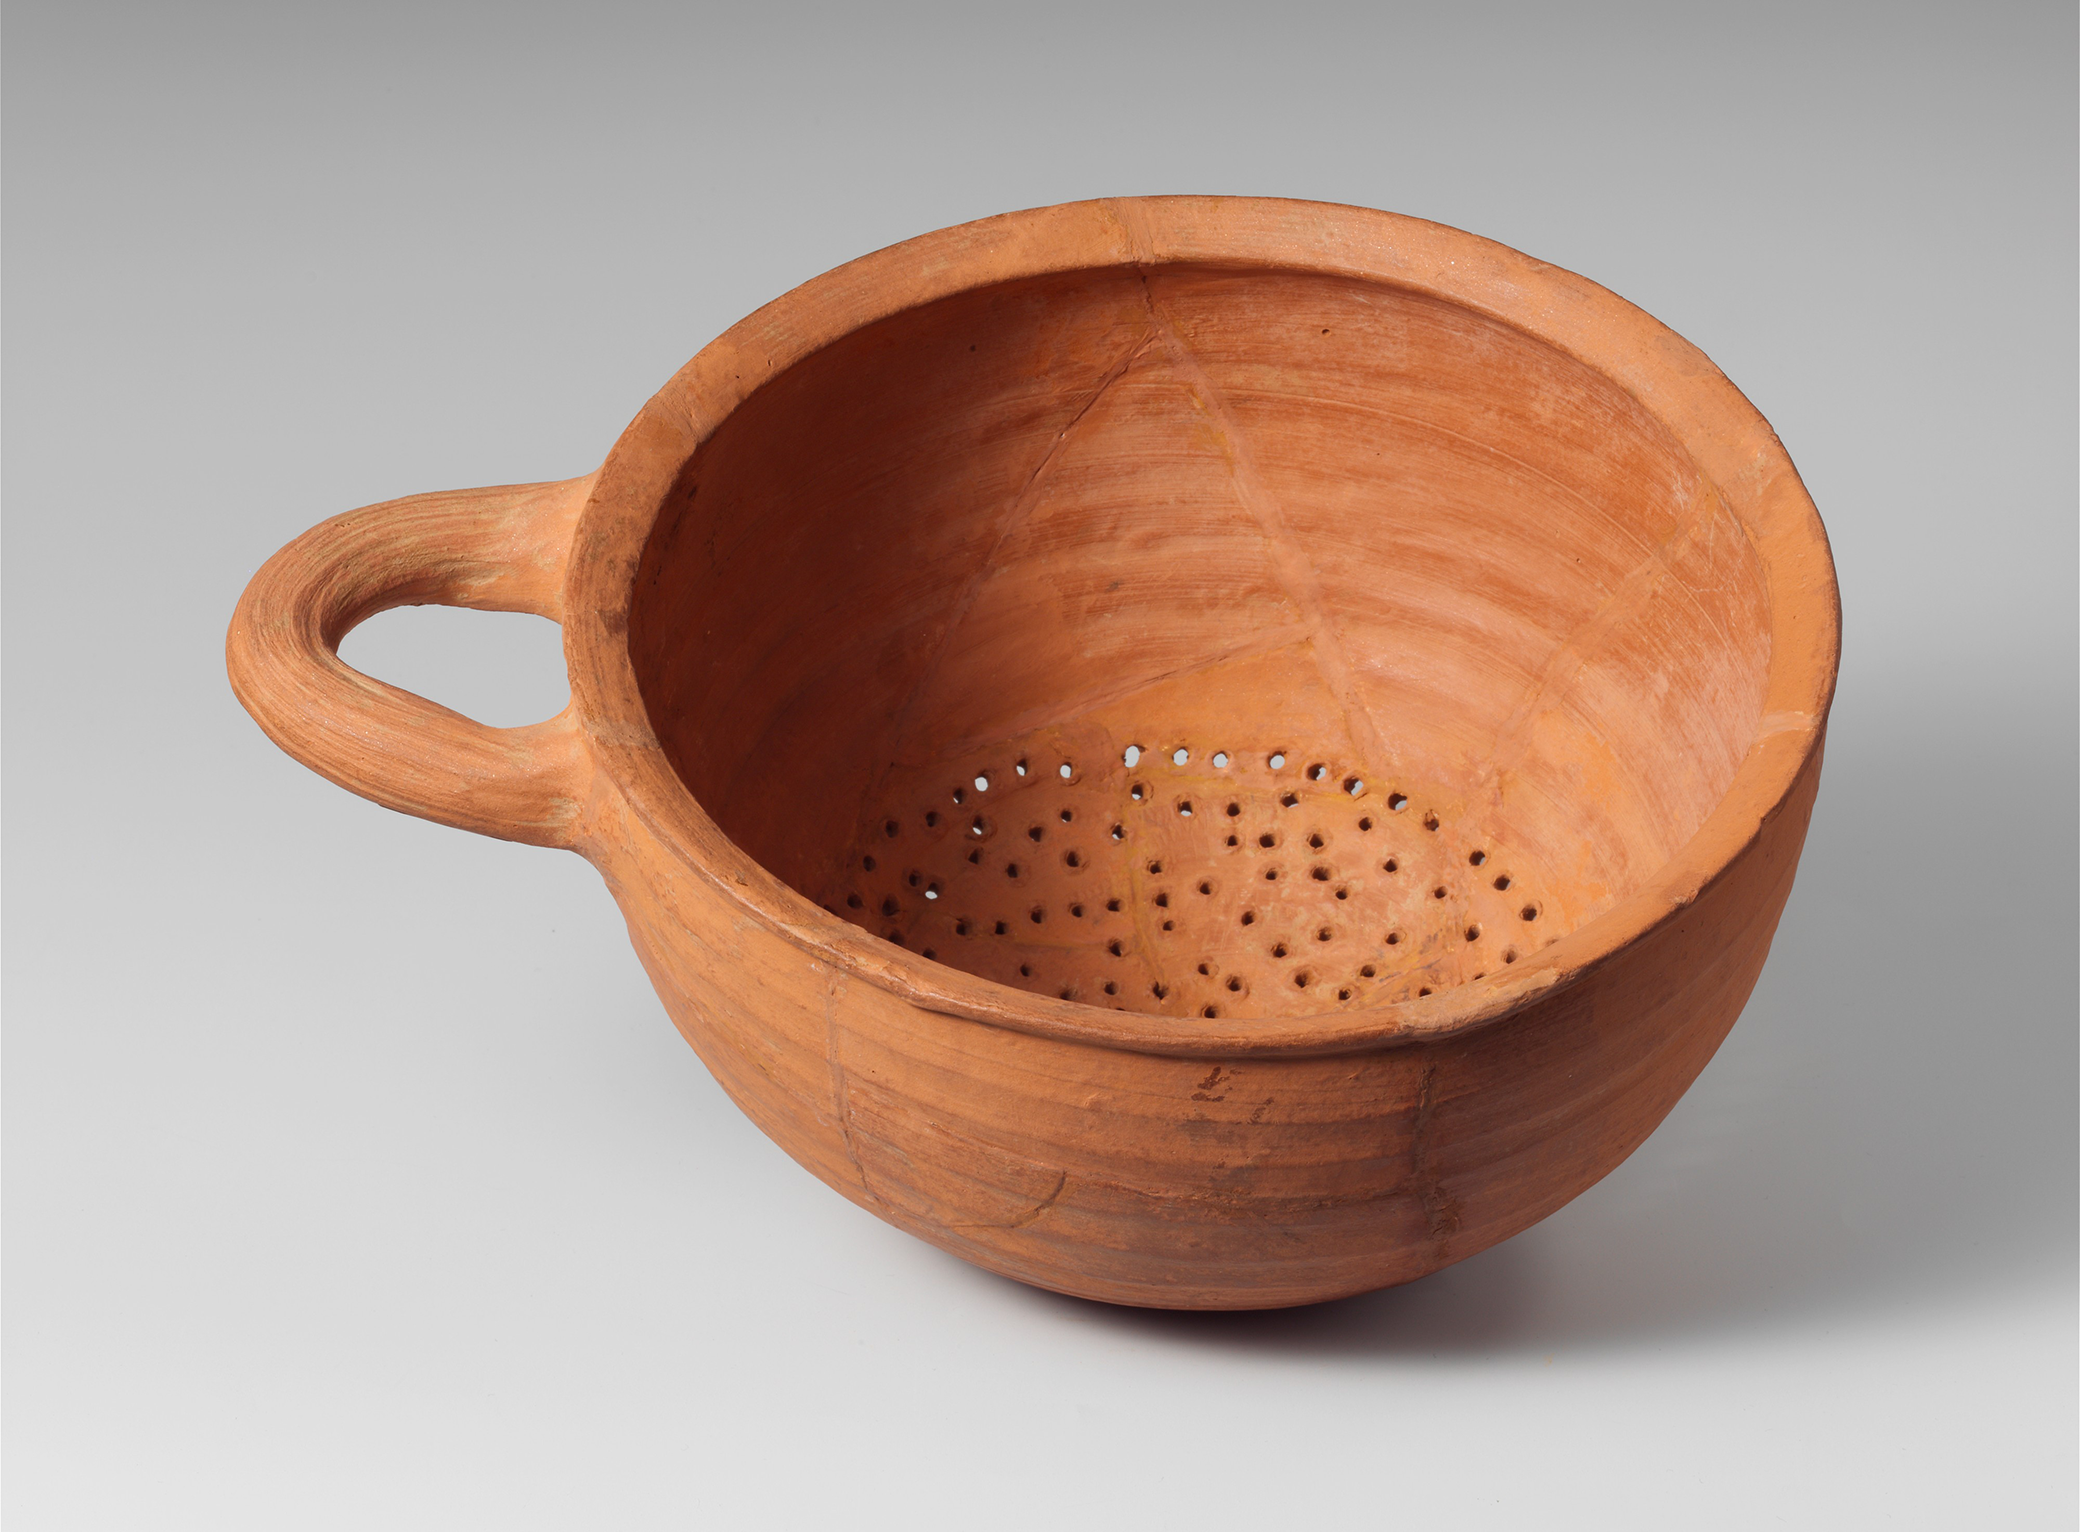 Terracotta hemispherical strainer, sixth century BC. The Metropolitan Museum of Art, Gift of The American Society for the Exploration of Sardis, 1914.